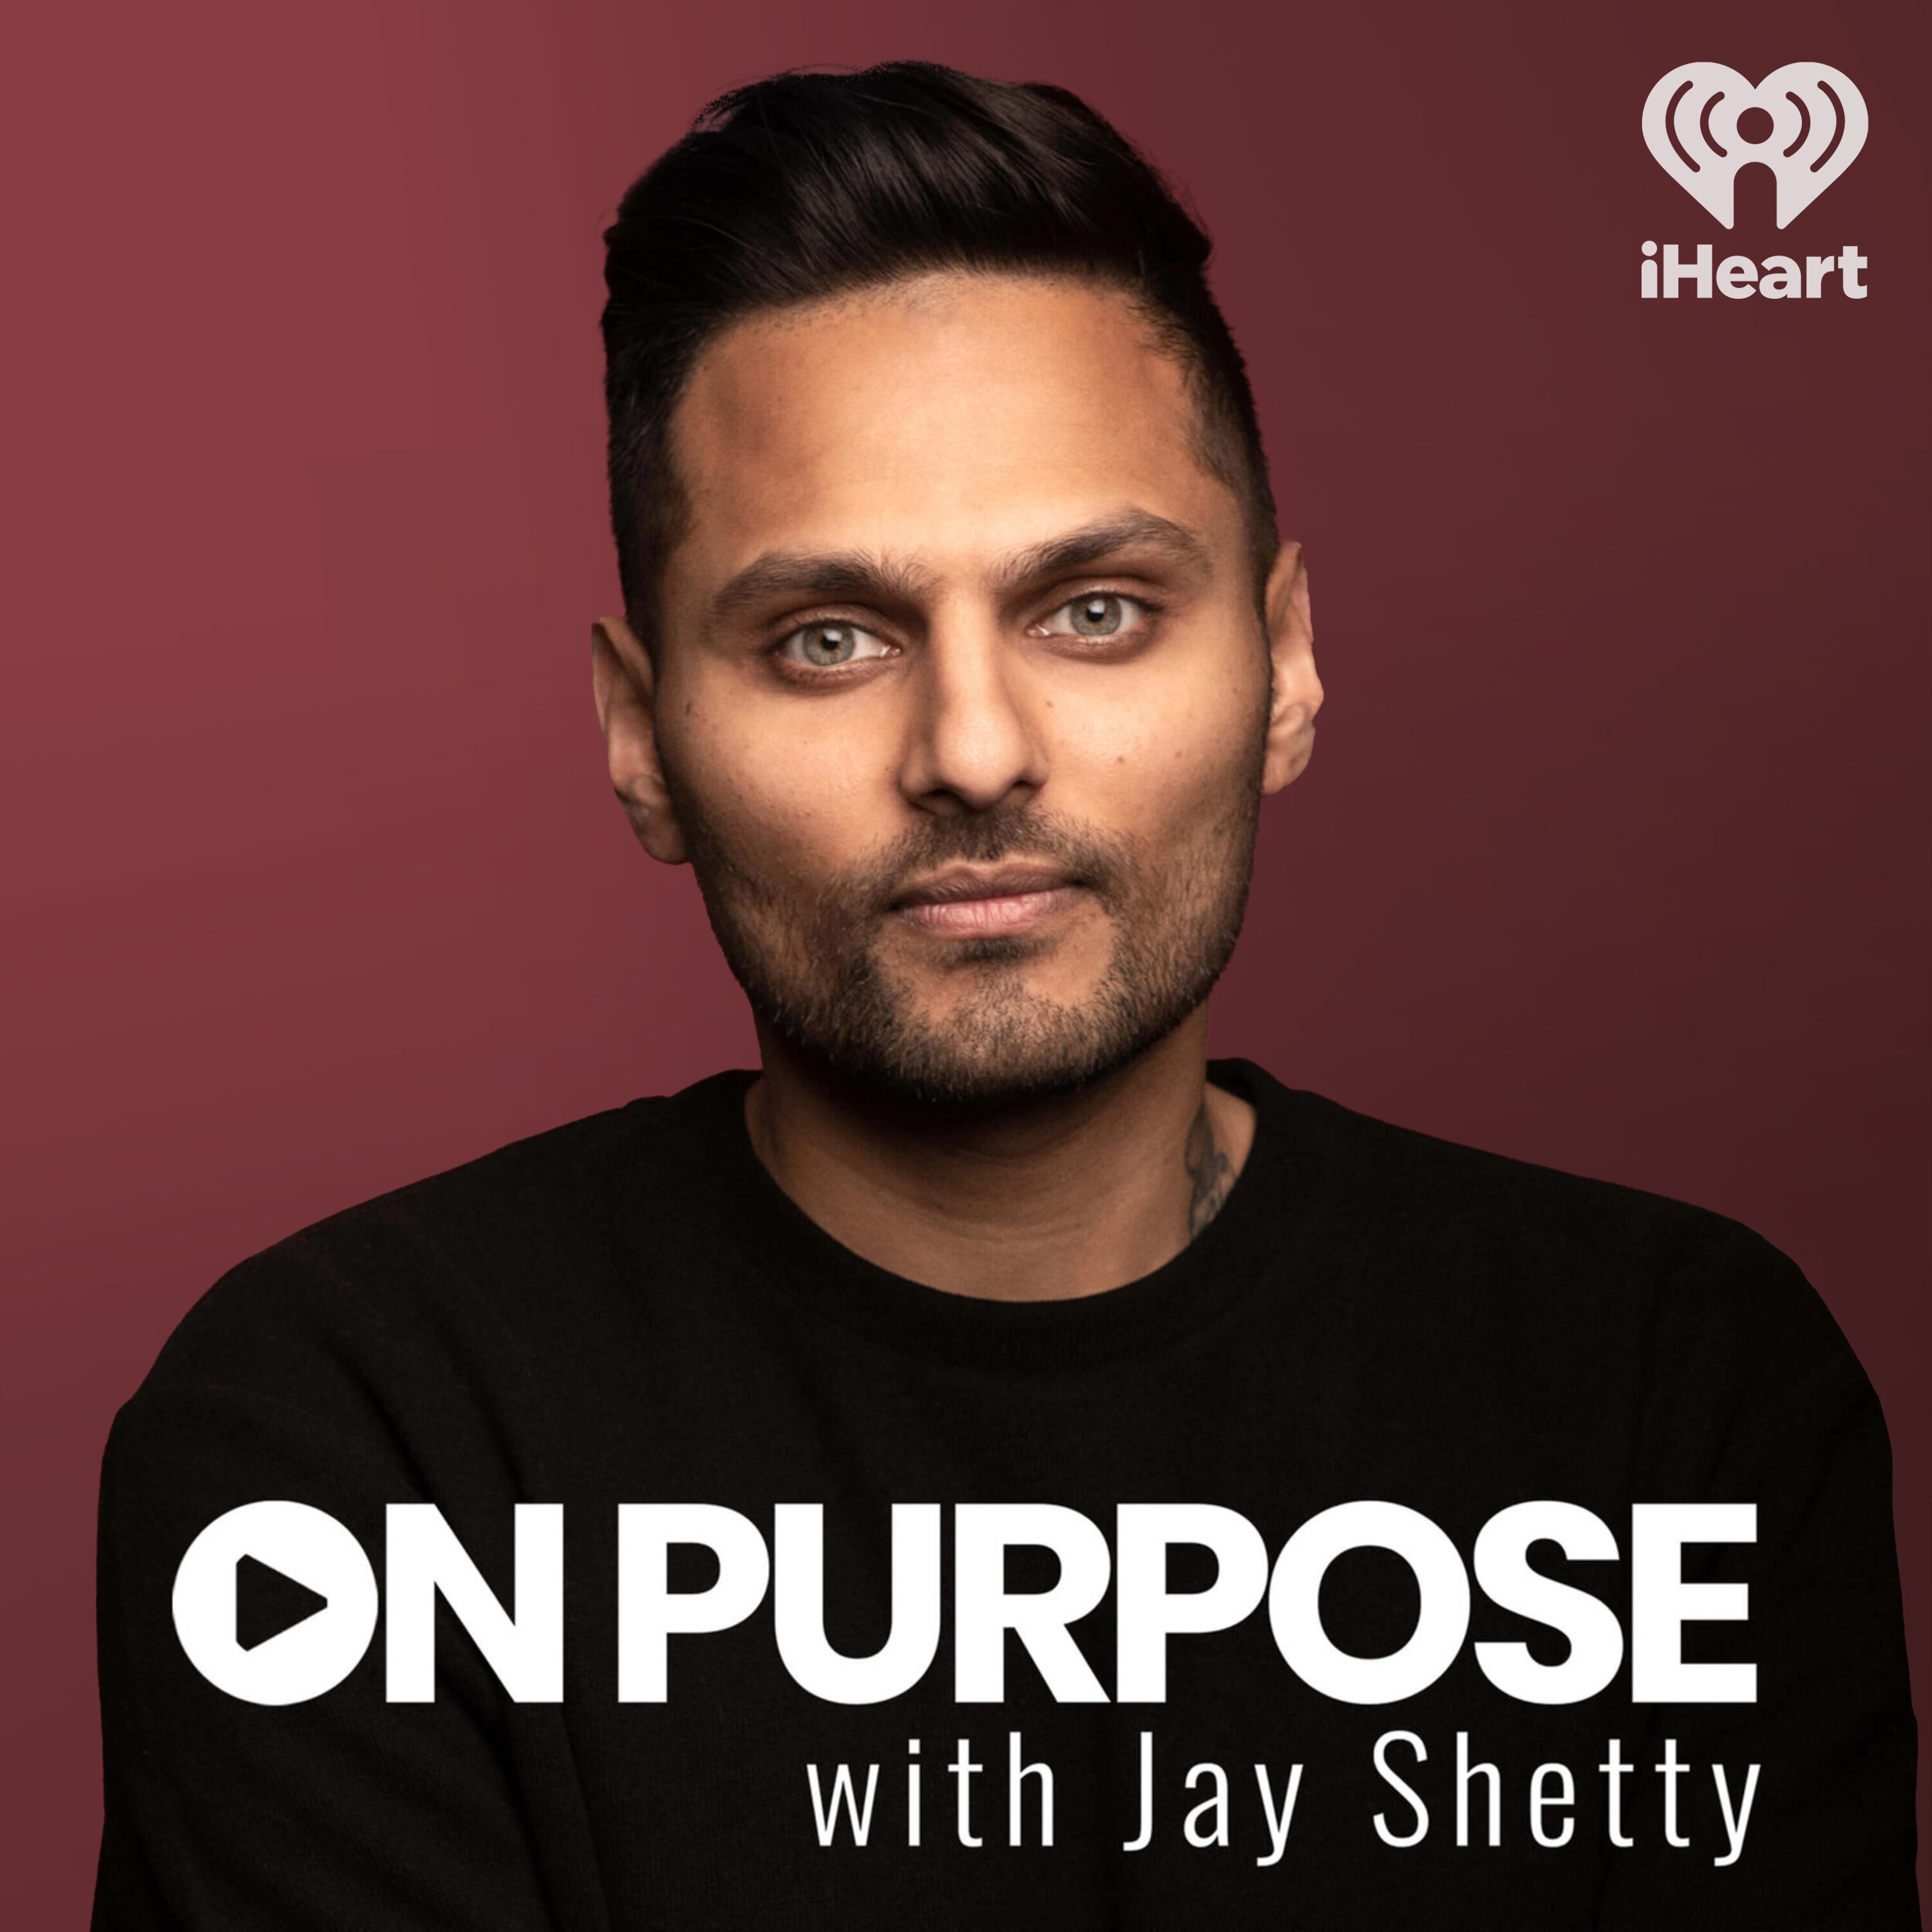 Review the 'On Purpose' Podcast